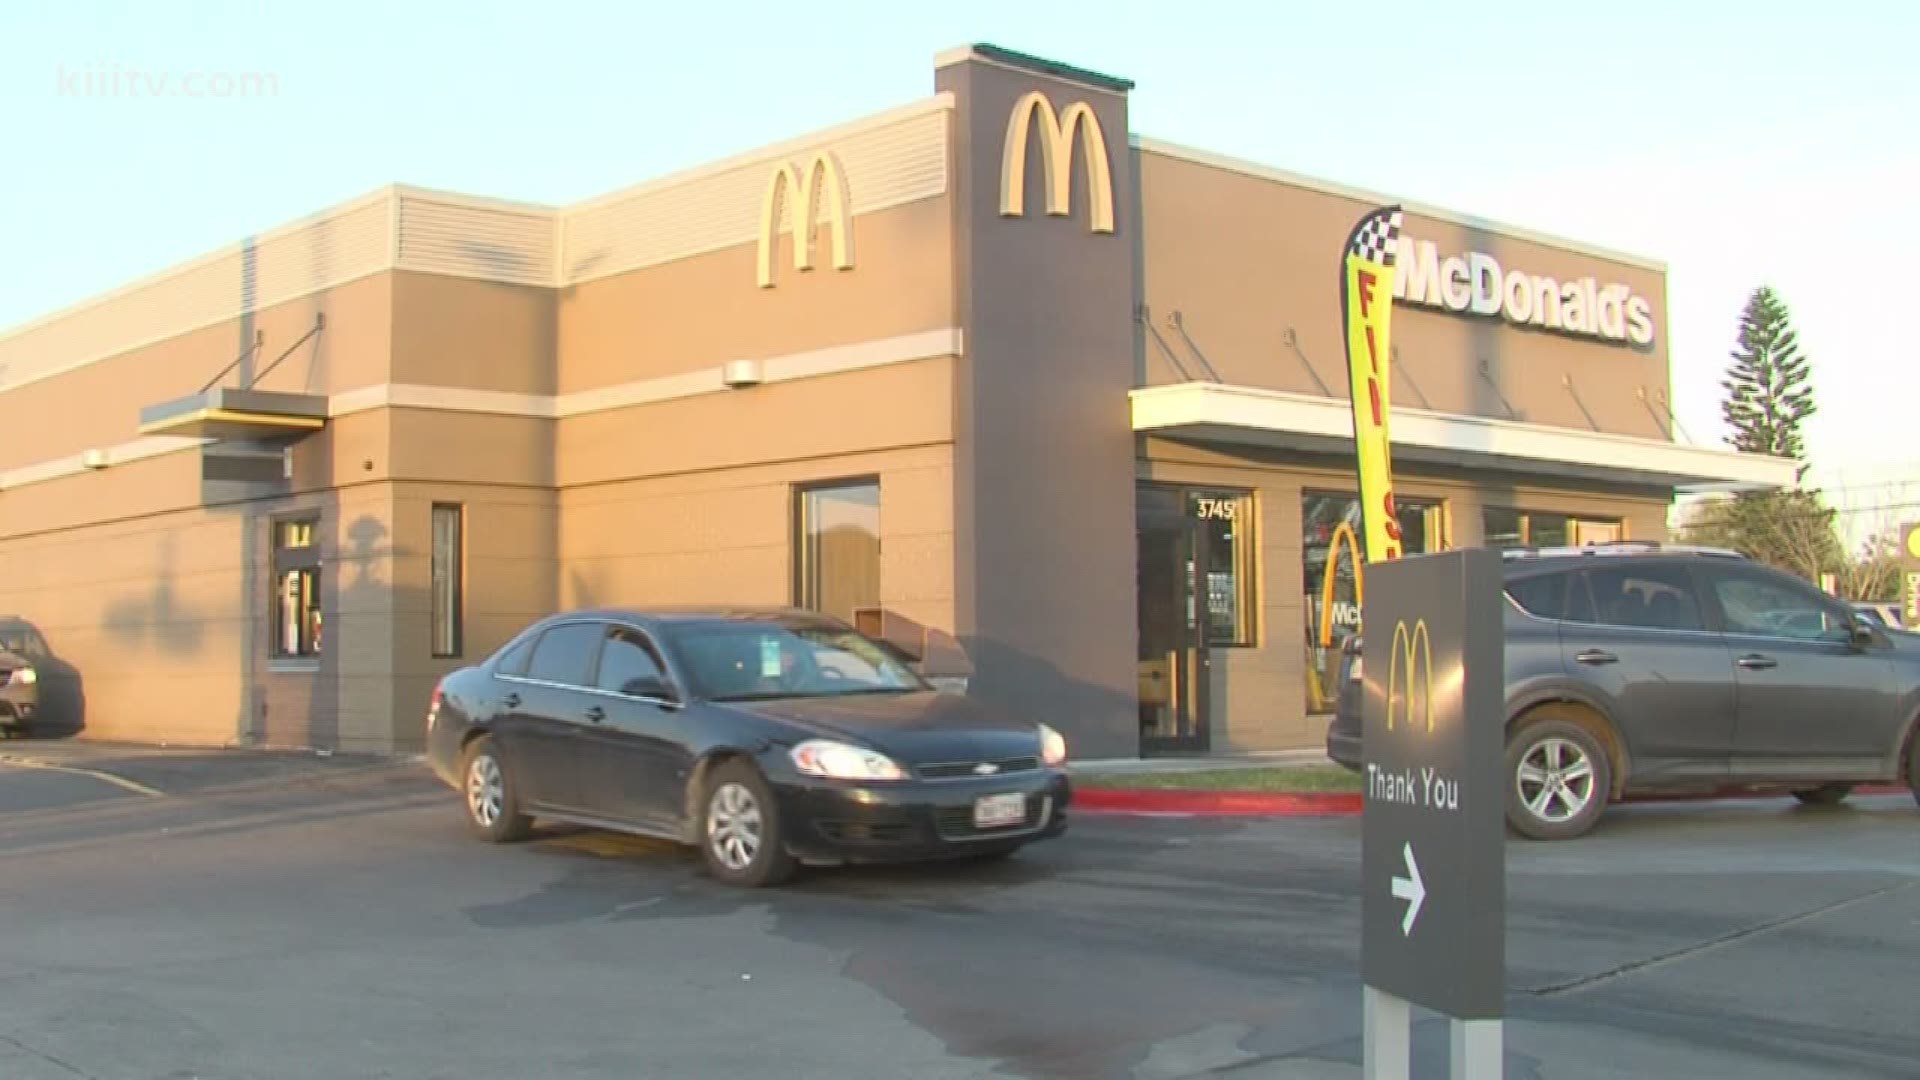 McDonald's restaurants in Corpus Christi are competing against other locations across the country to see which city has the fastest drive-thru.